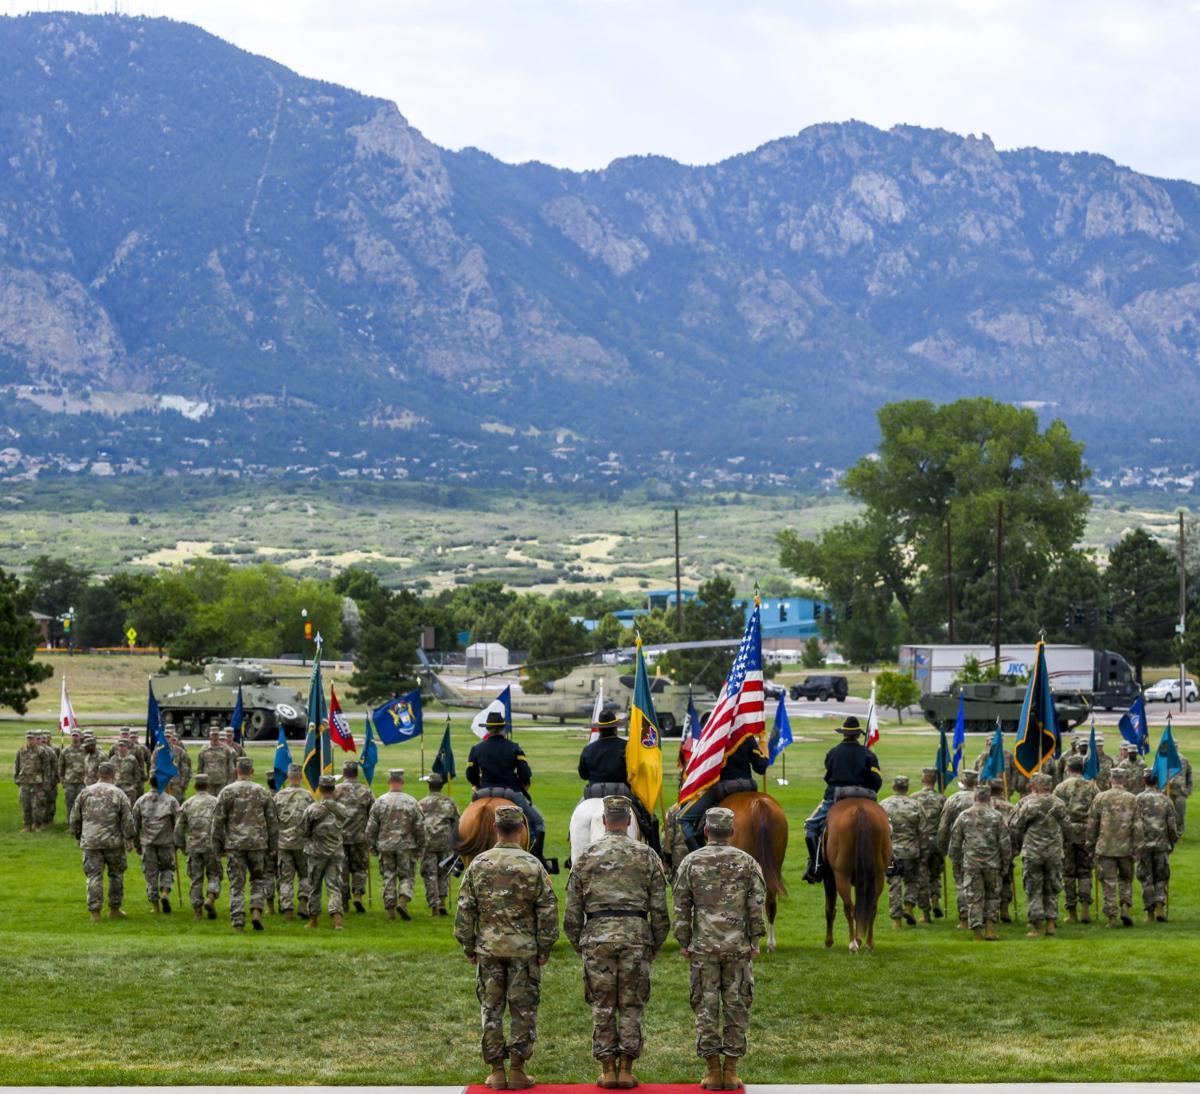 Army space troops to Fort Carson amid uncertain future